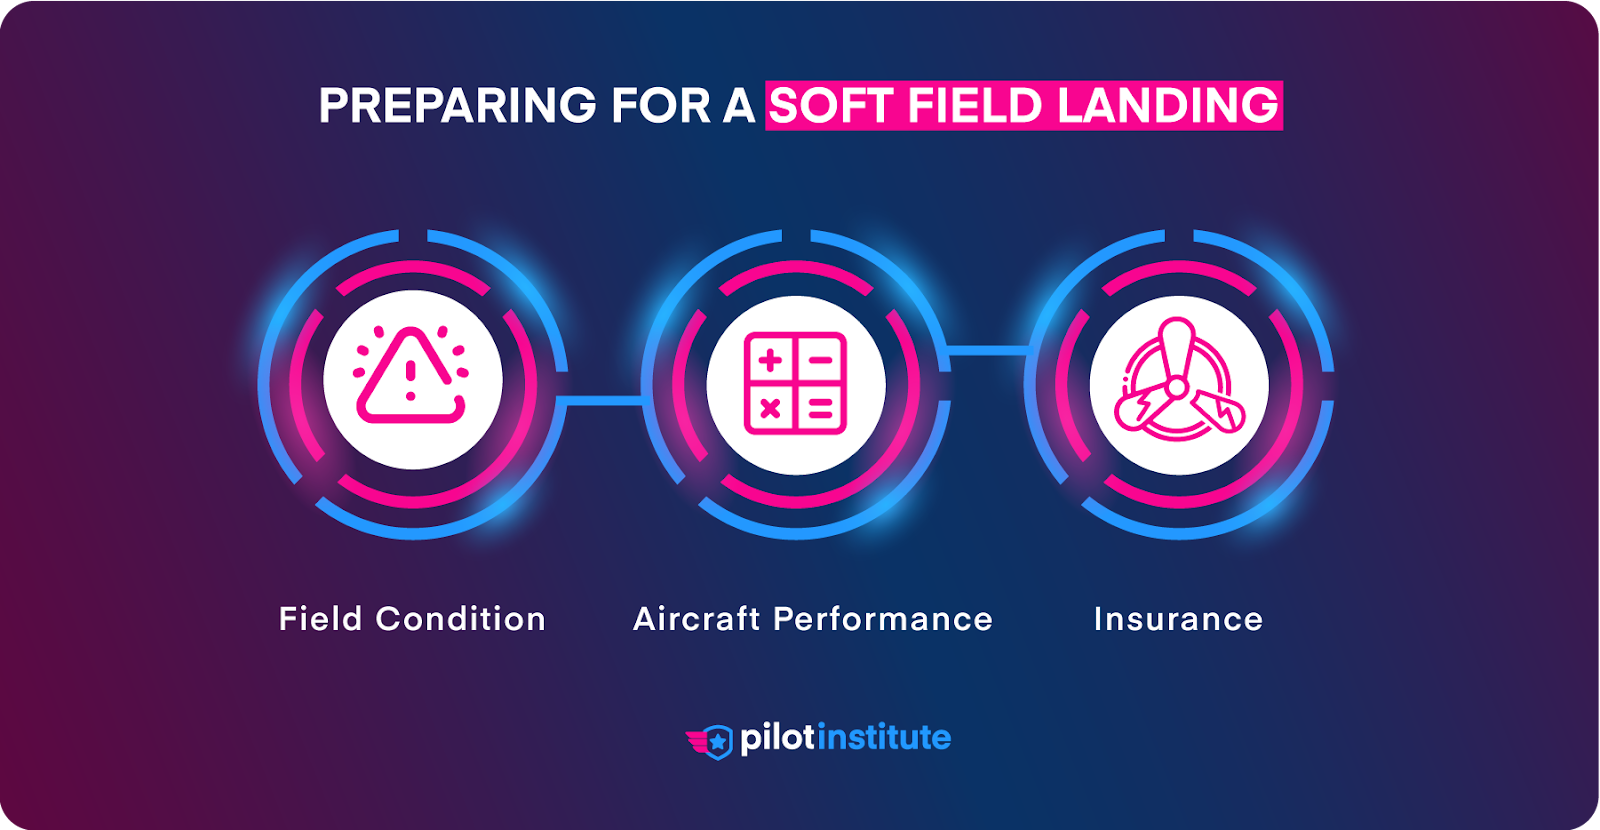 Preparing for a soft field landing infographic.